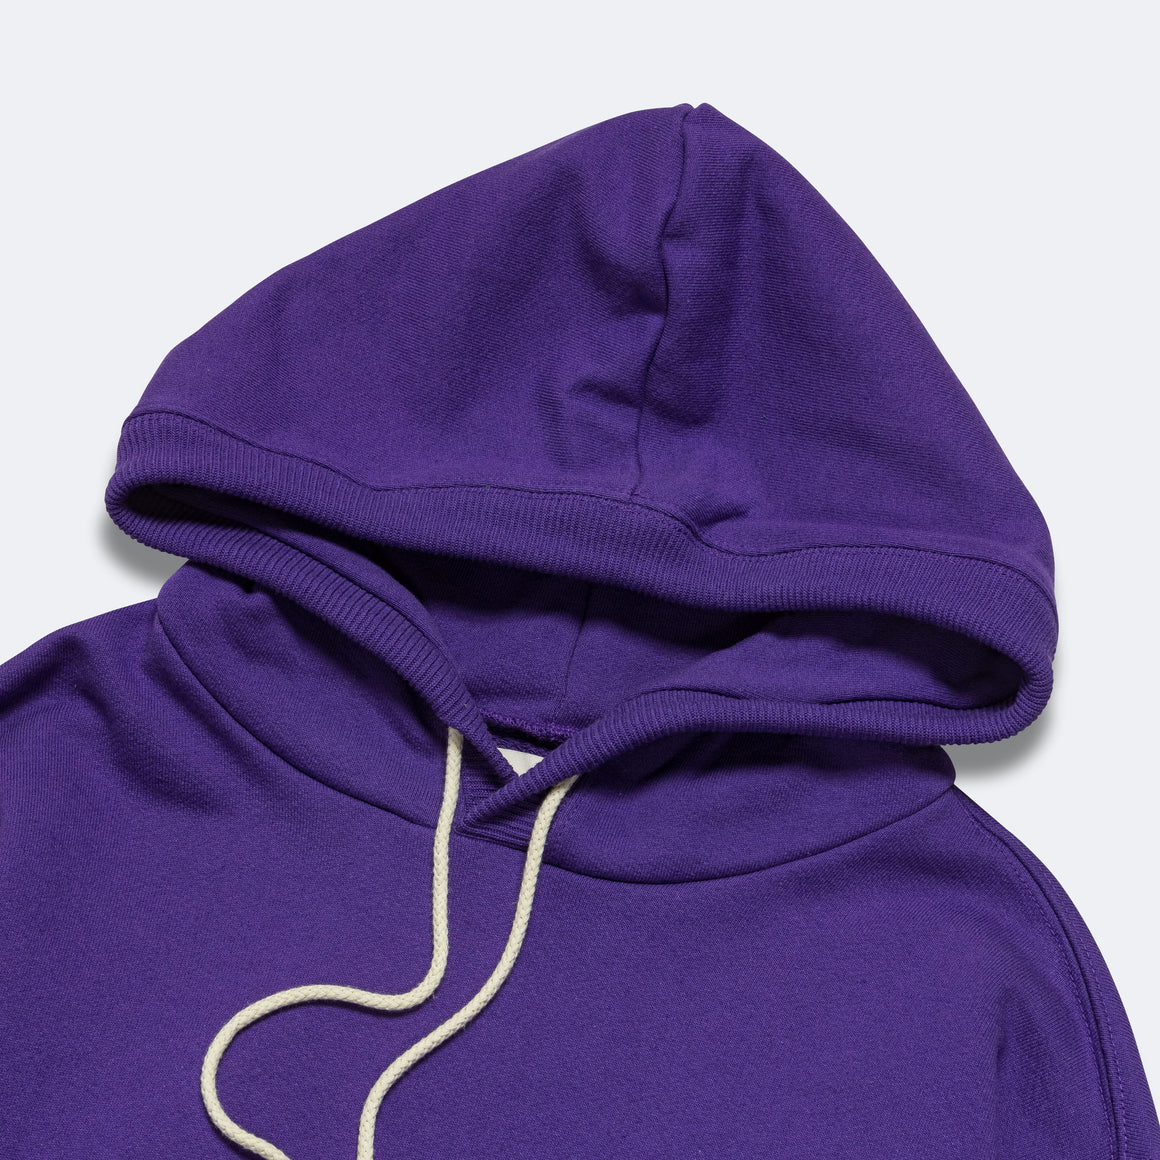 MADE in USA Hoodie - Prism Purple